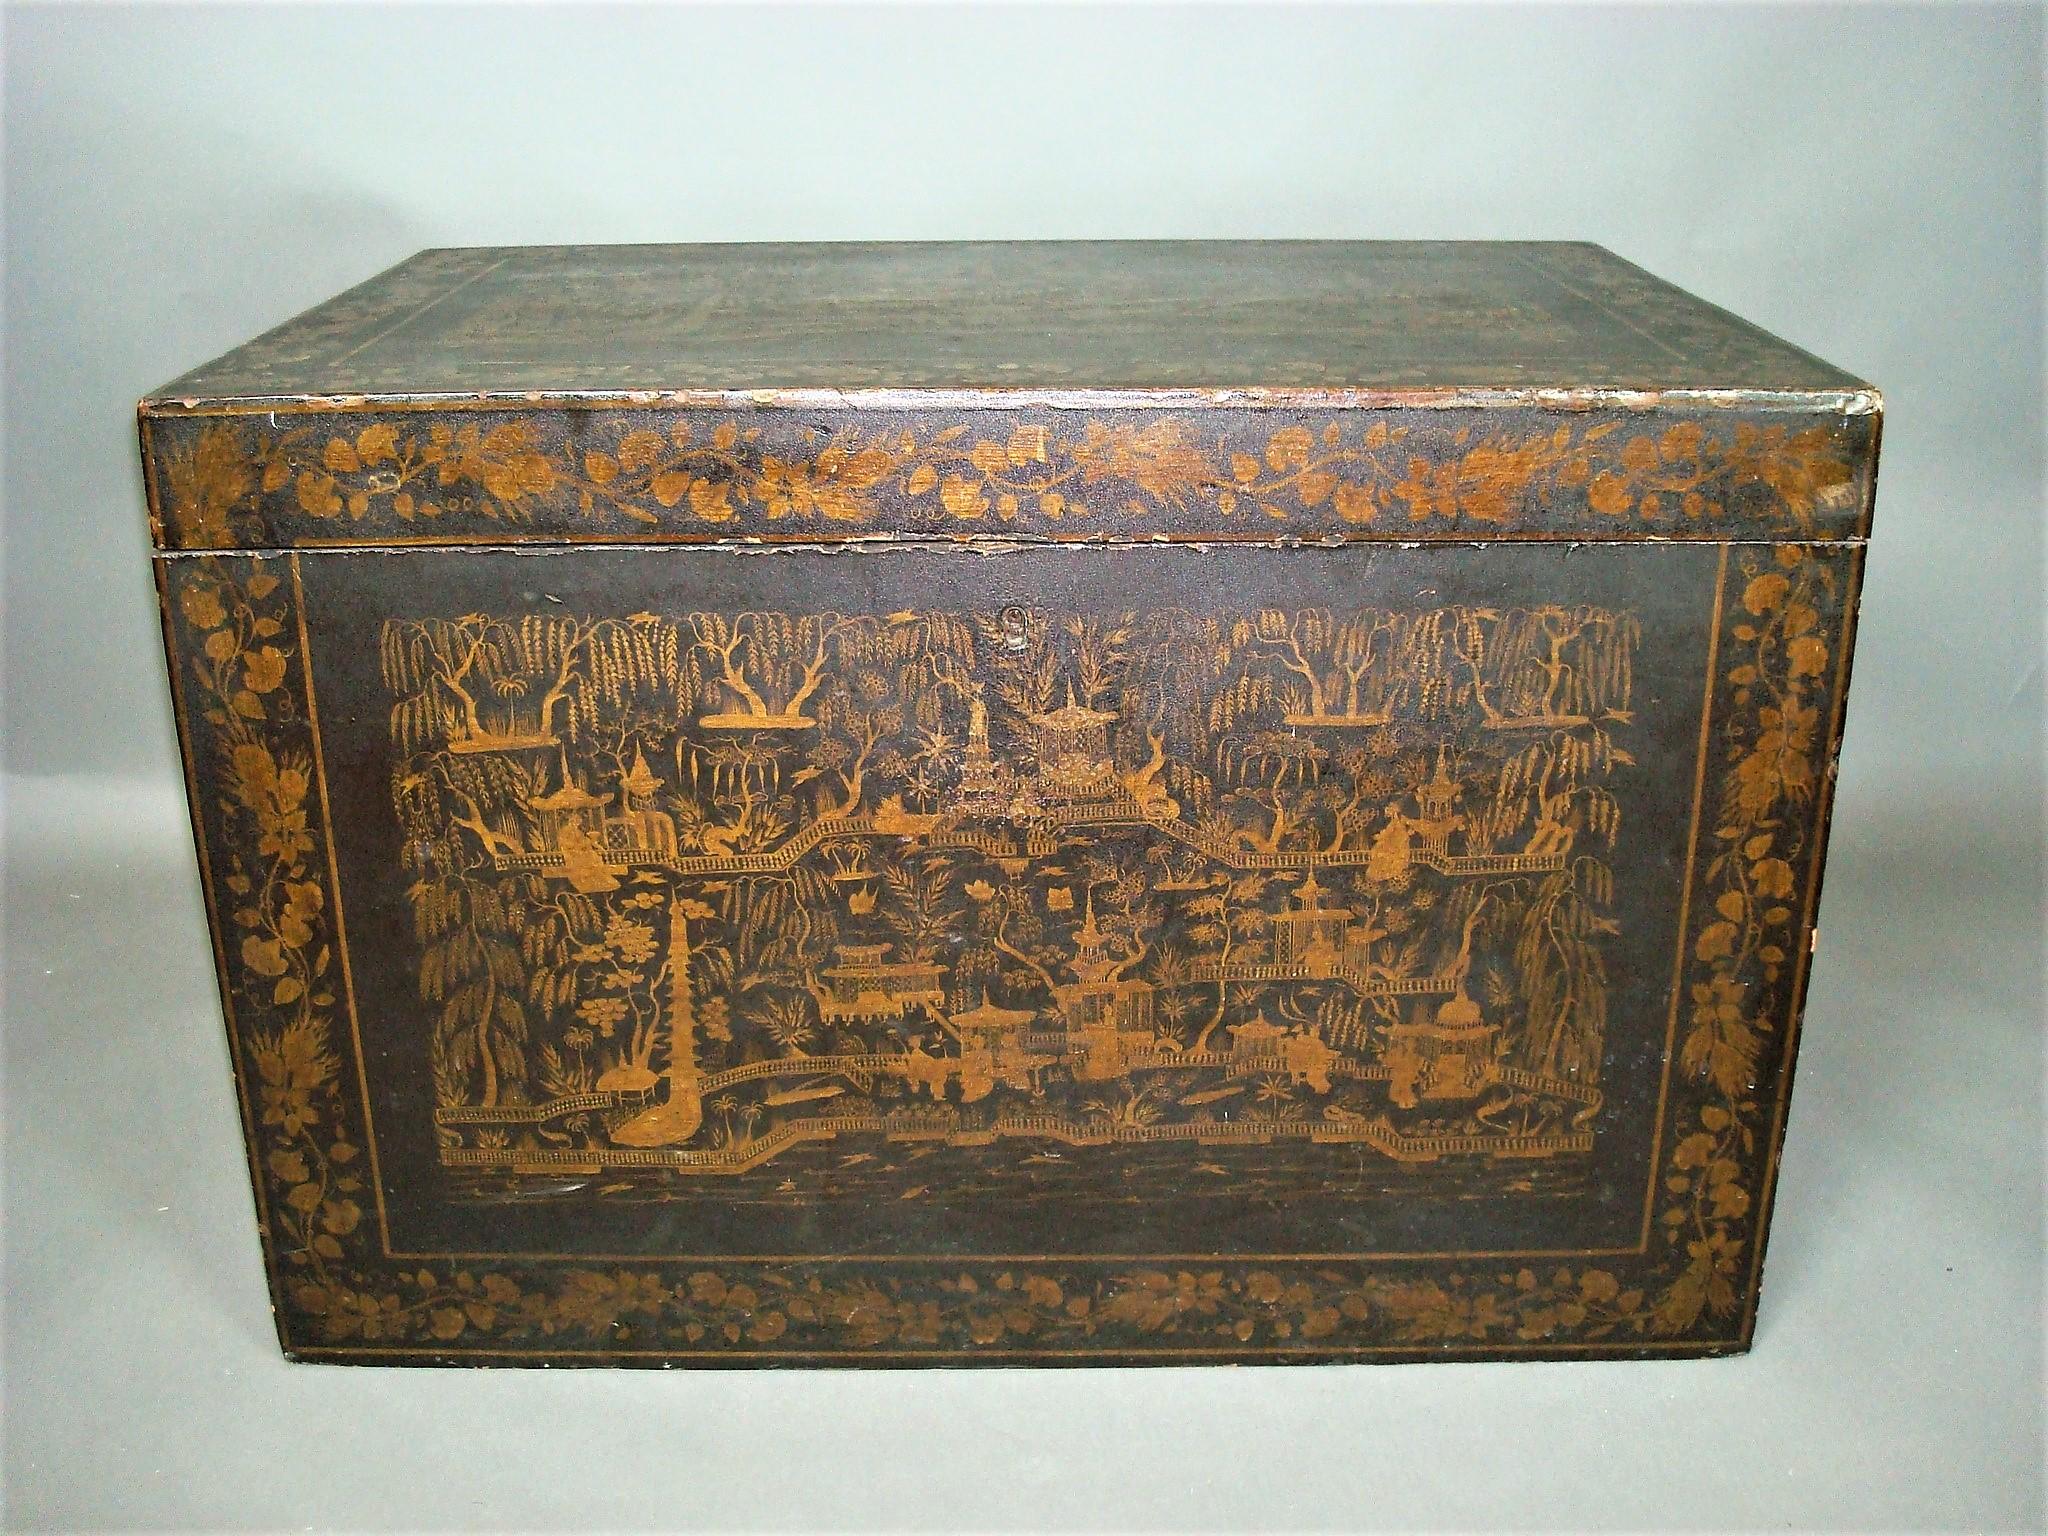 A good mid-19th century Indian chinoiserie lacquered trunk; the rectangular hinged lid revealing the original vivid blue painted interior, retaining its original lift out tray with pierced carrying handles. The whole trunk profusely decorated in